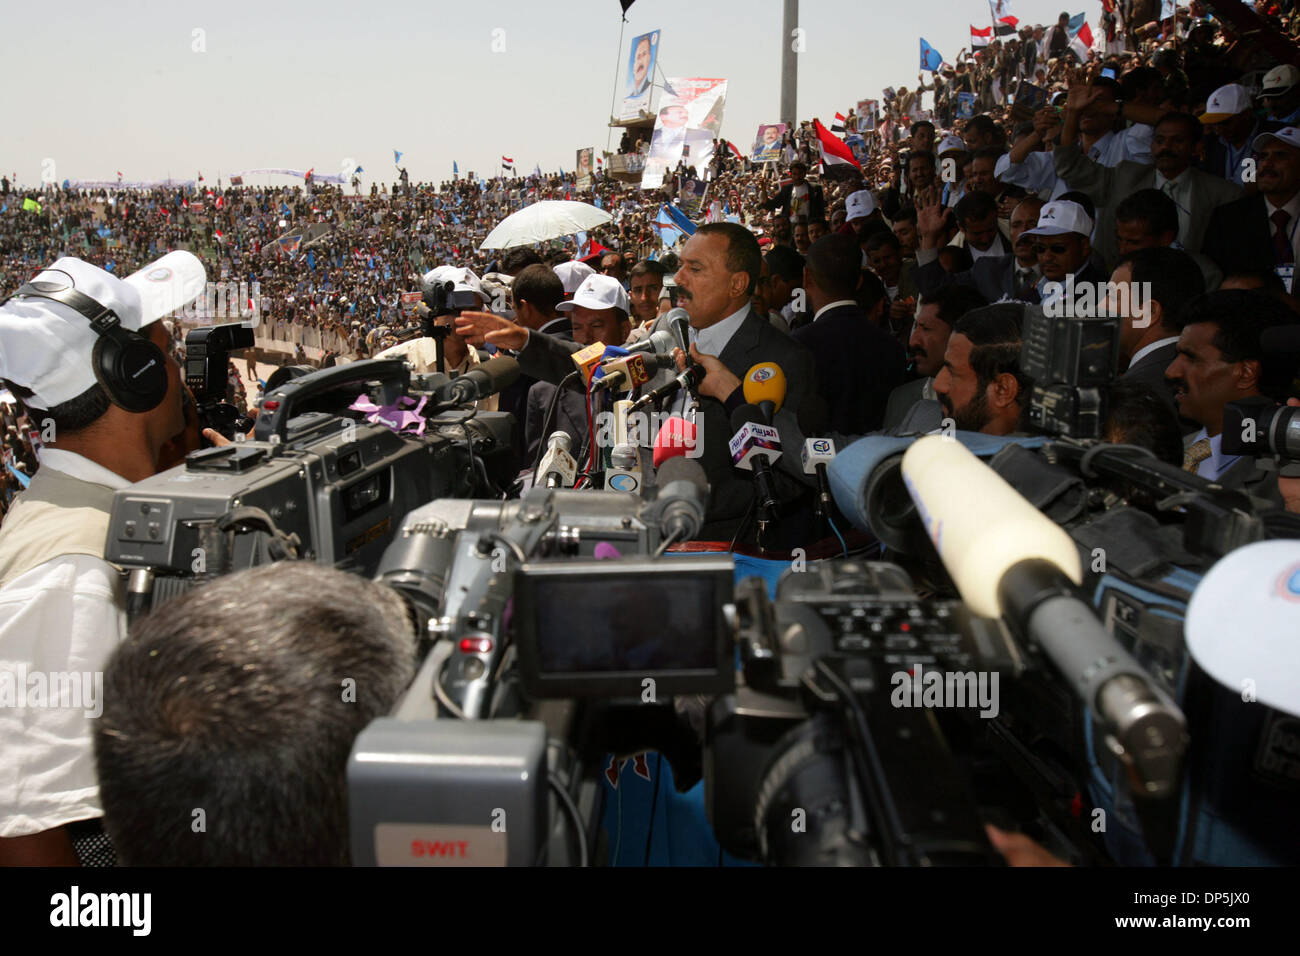 Sep 16, 2006; Dhamar, YEMEN; President Ali Abdullah Saleh addresses the crowd at an election rally for him in Dhamar, Yemen,  in preparation for election day about a week from today. Close to 100,000 gathered for the rally. His closest political rival, Faisal Othman Bin Shamlan, is predicted to take roughly 25% to 30% of the votes according to polling spokesmen.  Mandatory Credit:  Stock Photo